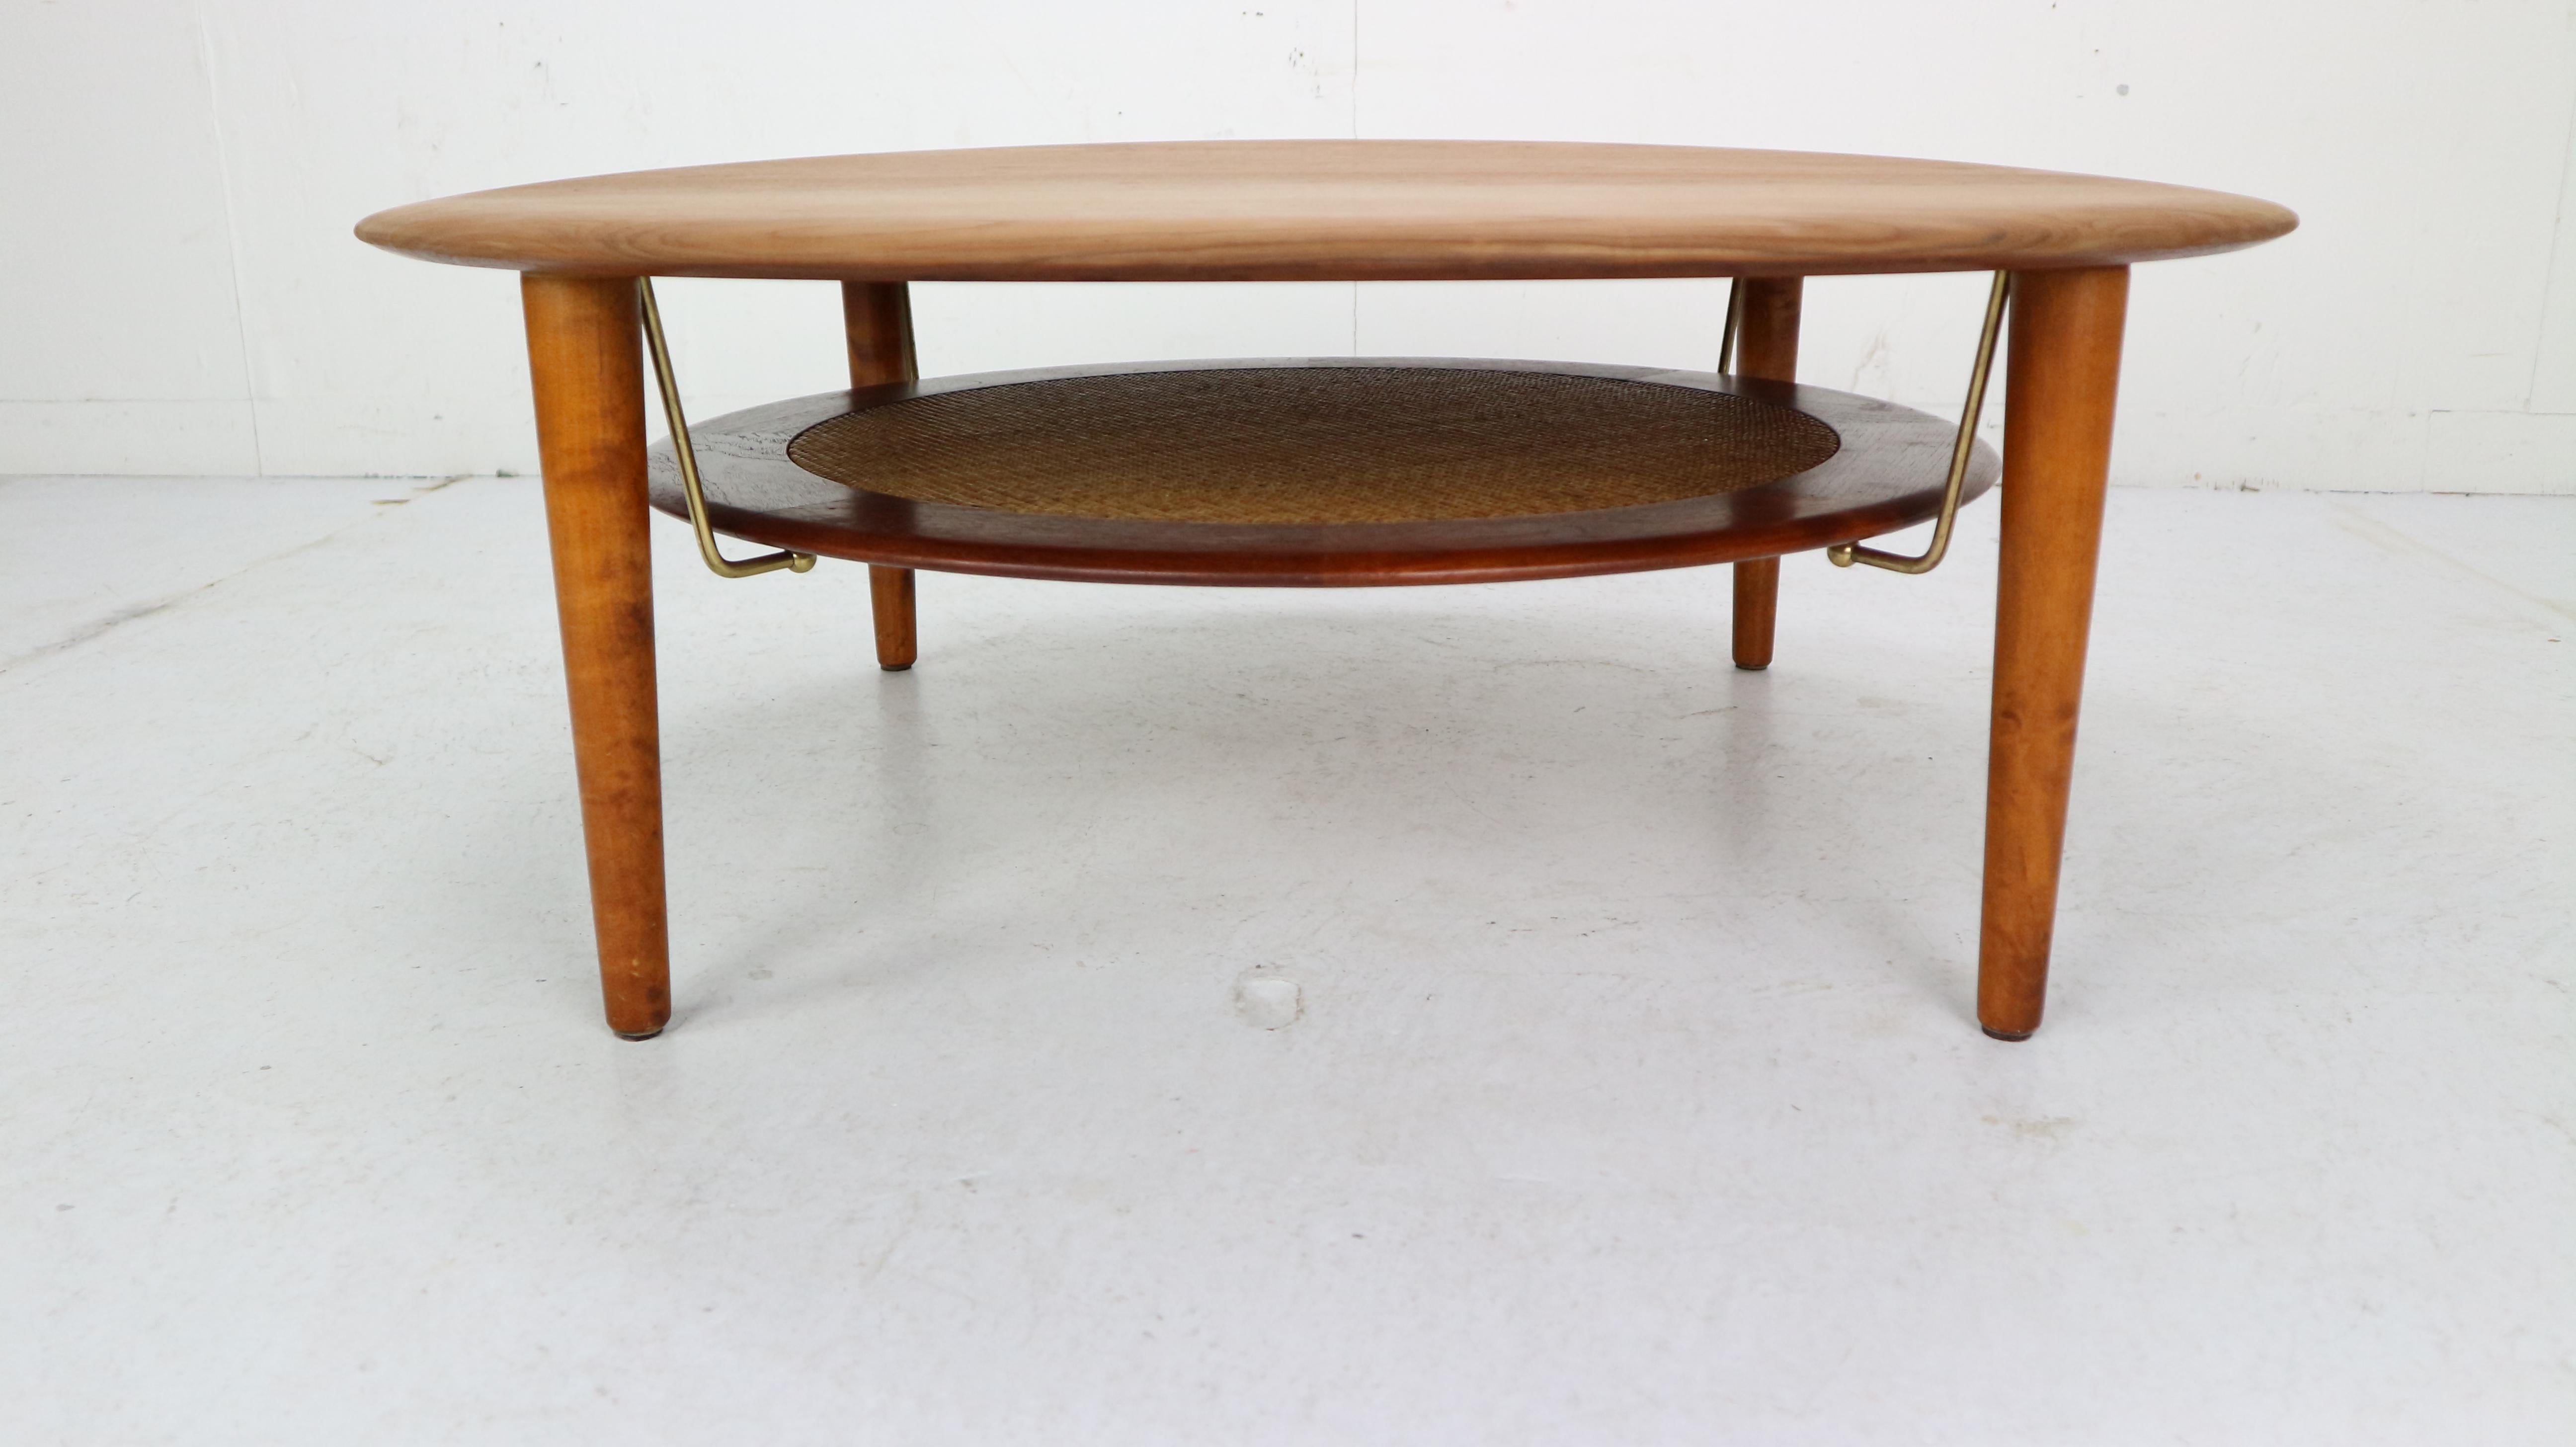 This round coffee table was designed by Peter Hvidt & Orla Mølgaard-Nielsen and was produced by France & Søn in 1950s, Denmark.
The table is made of solid teak and has a woven cane shelf that is supported by brass rods. The shelf can be used to